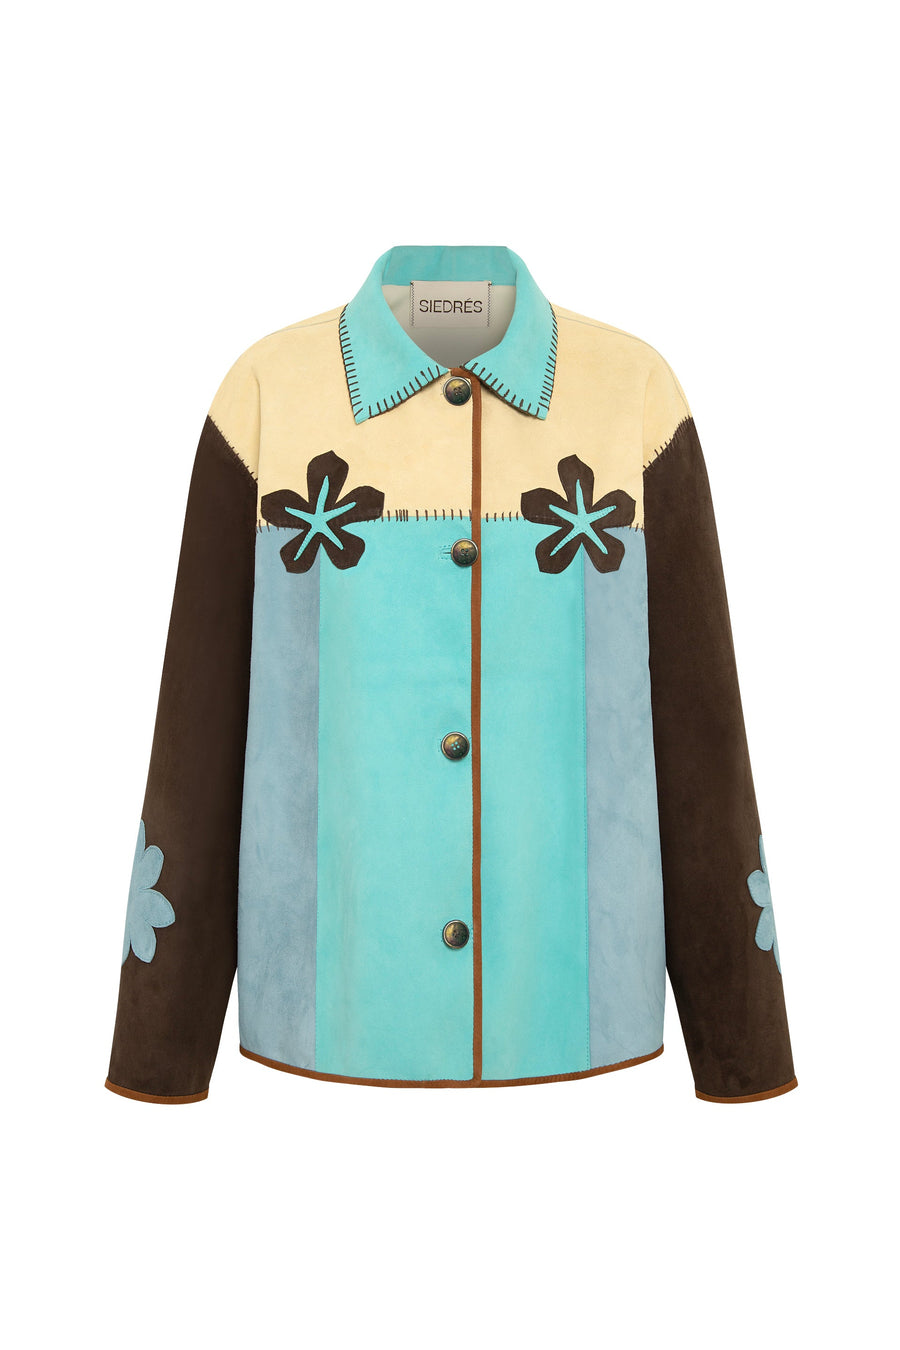 FLORY - Embroidered multi-color jacket